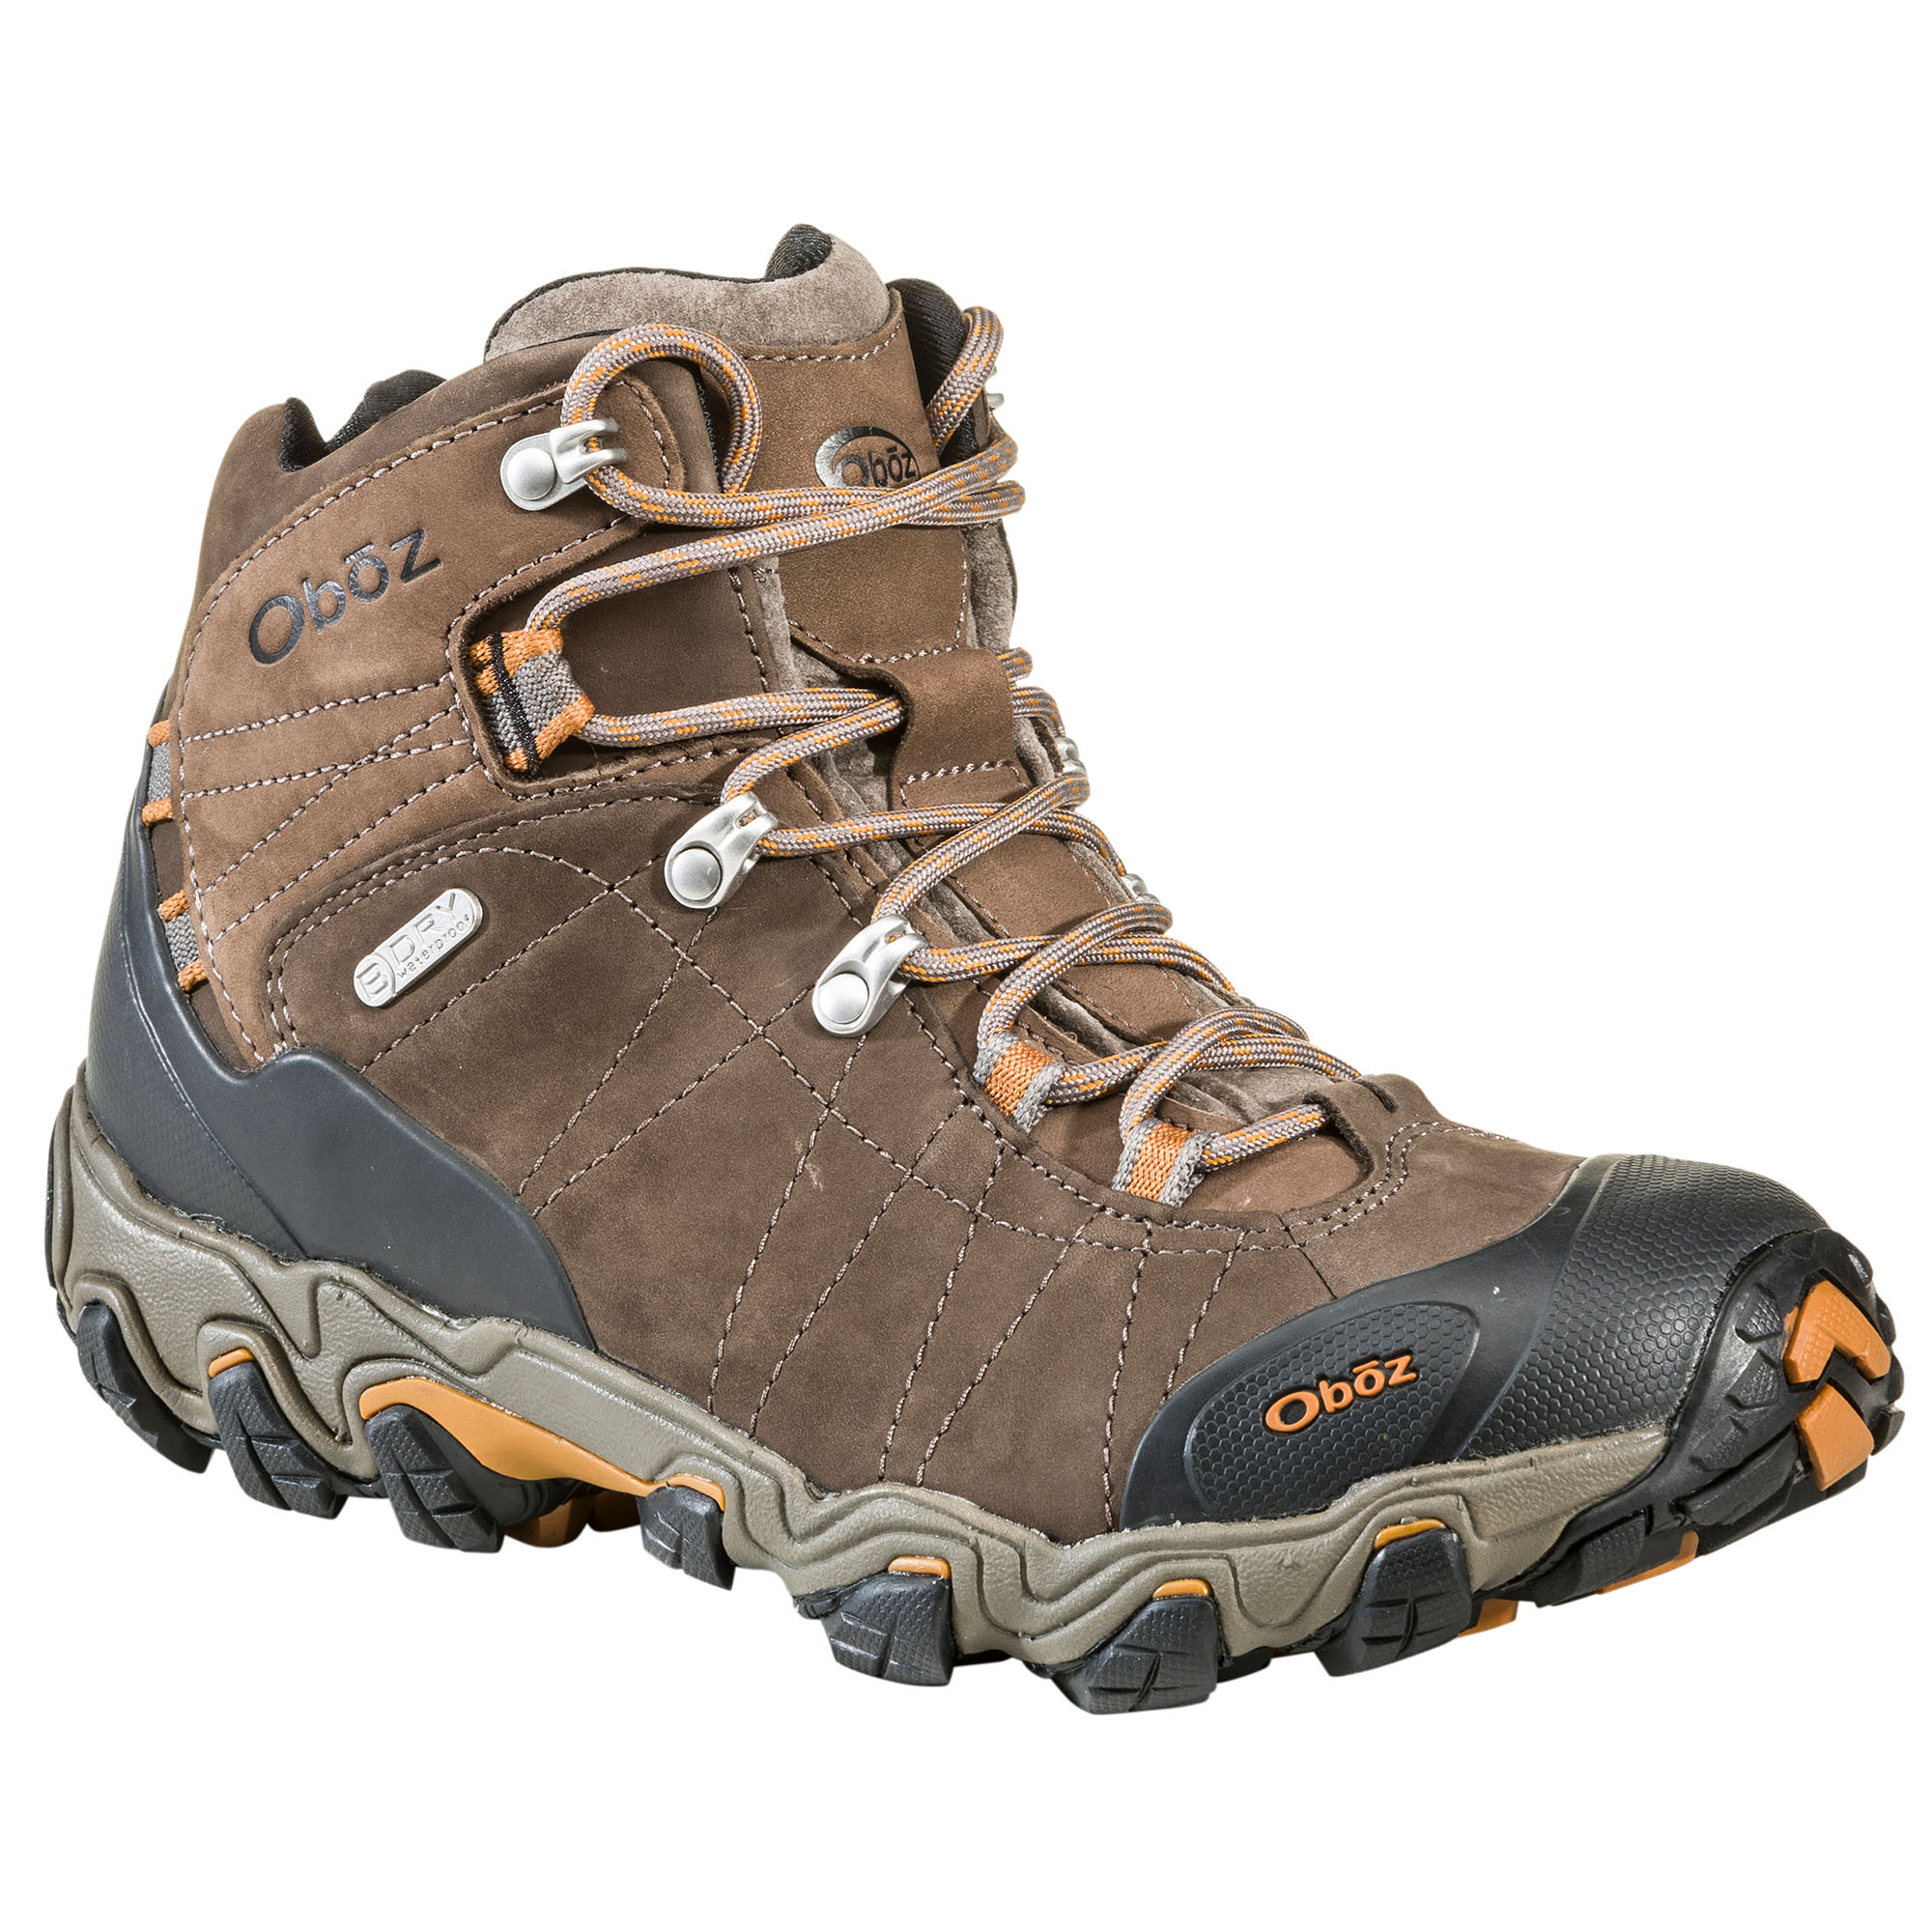 mens wide hiking boots